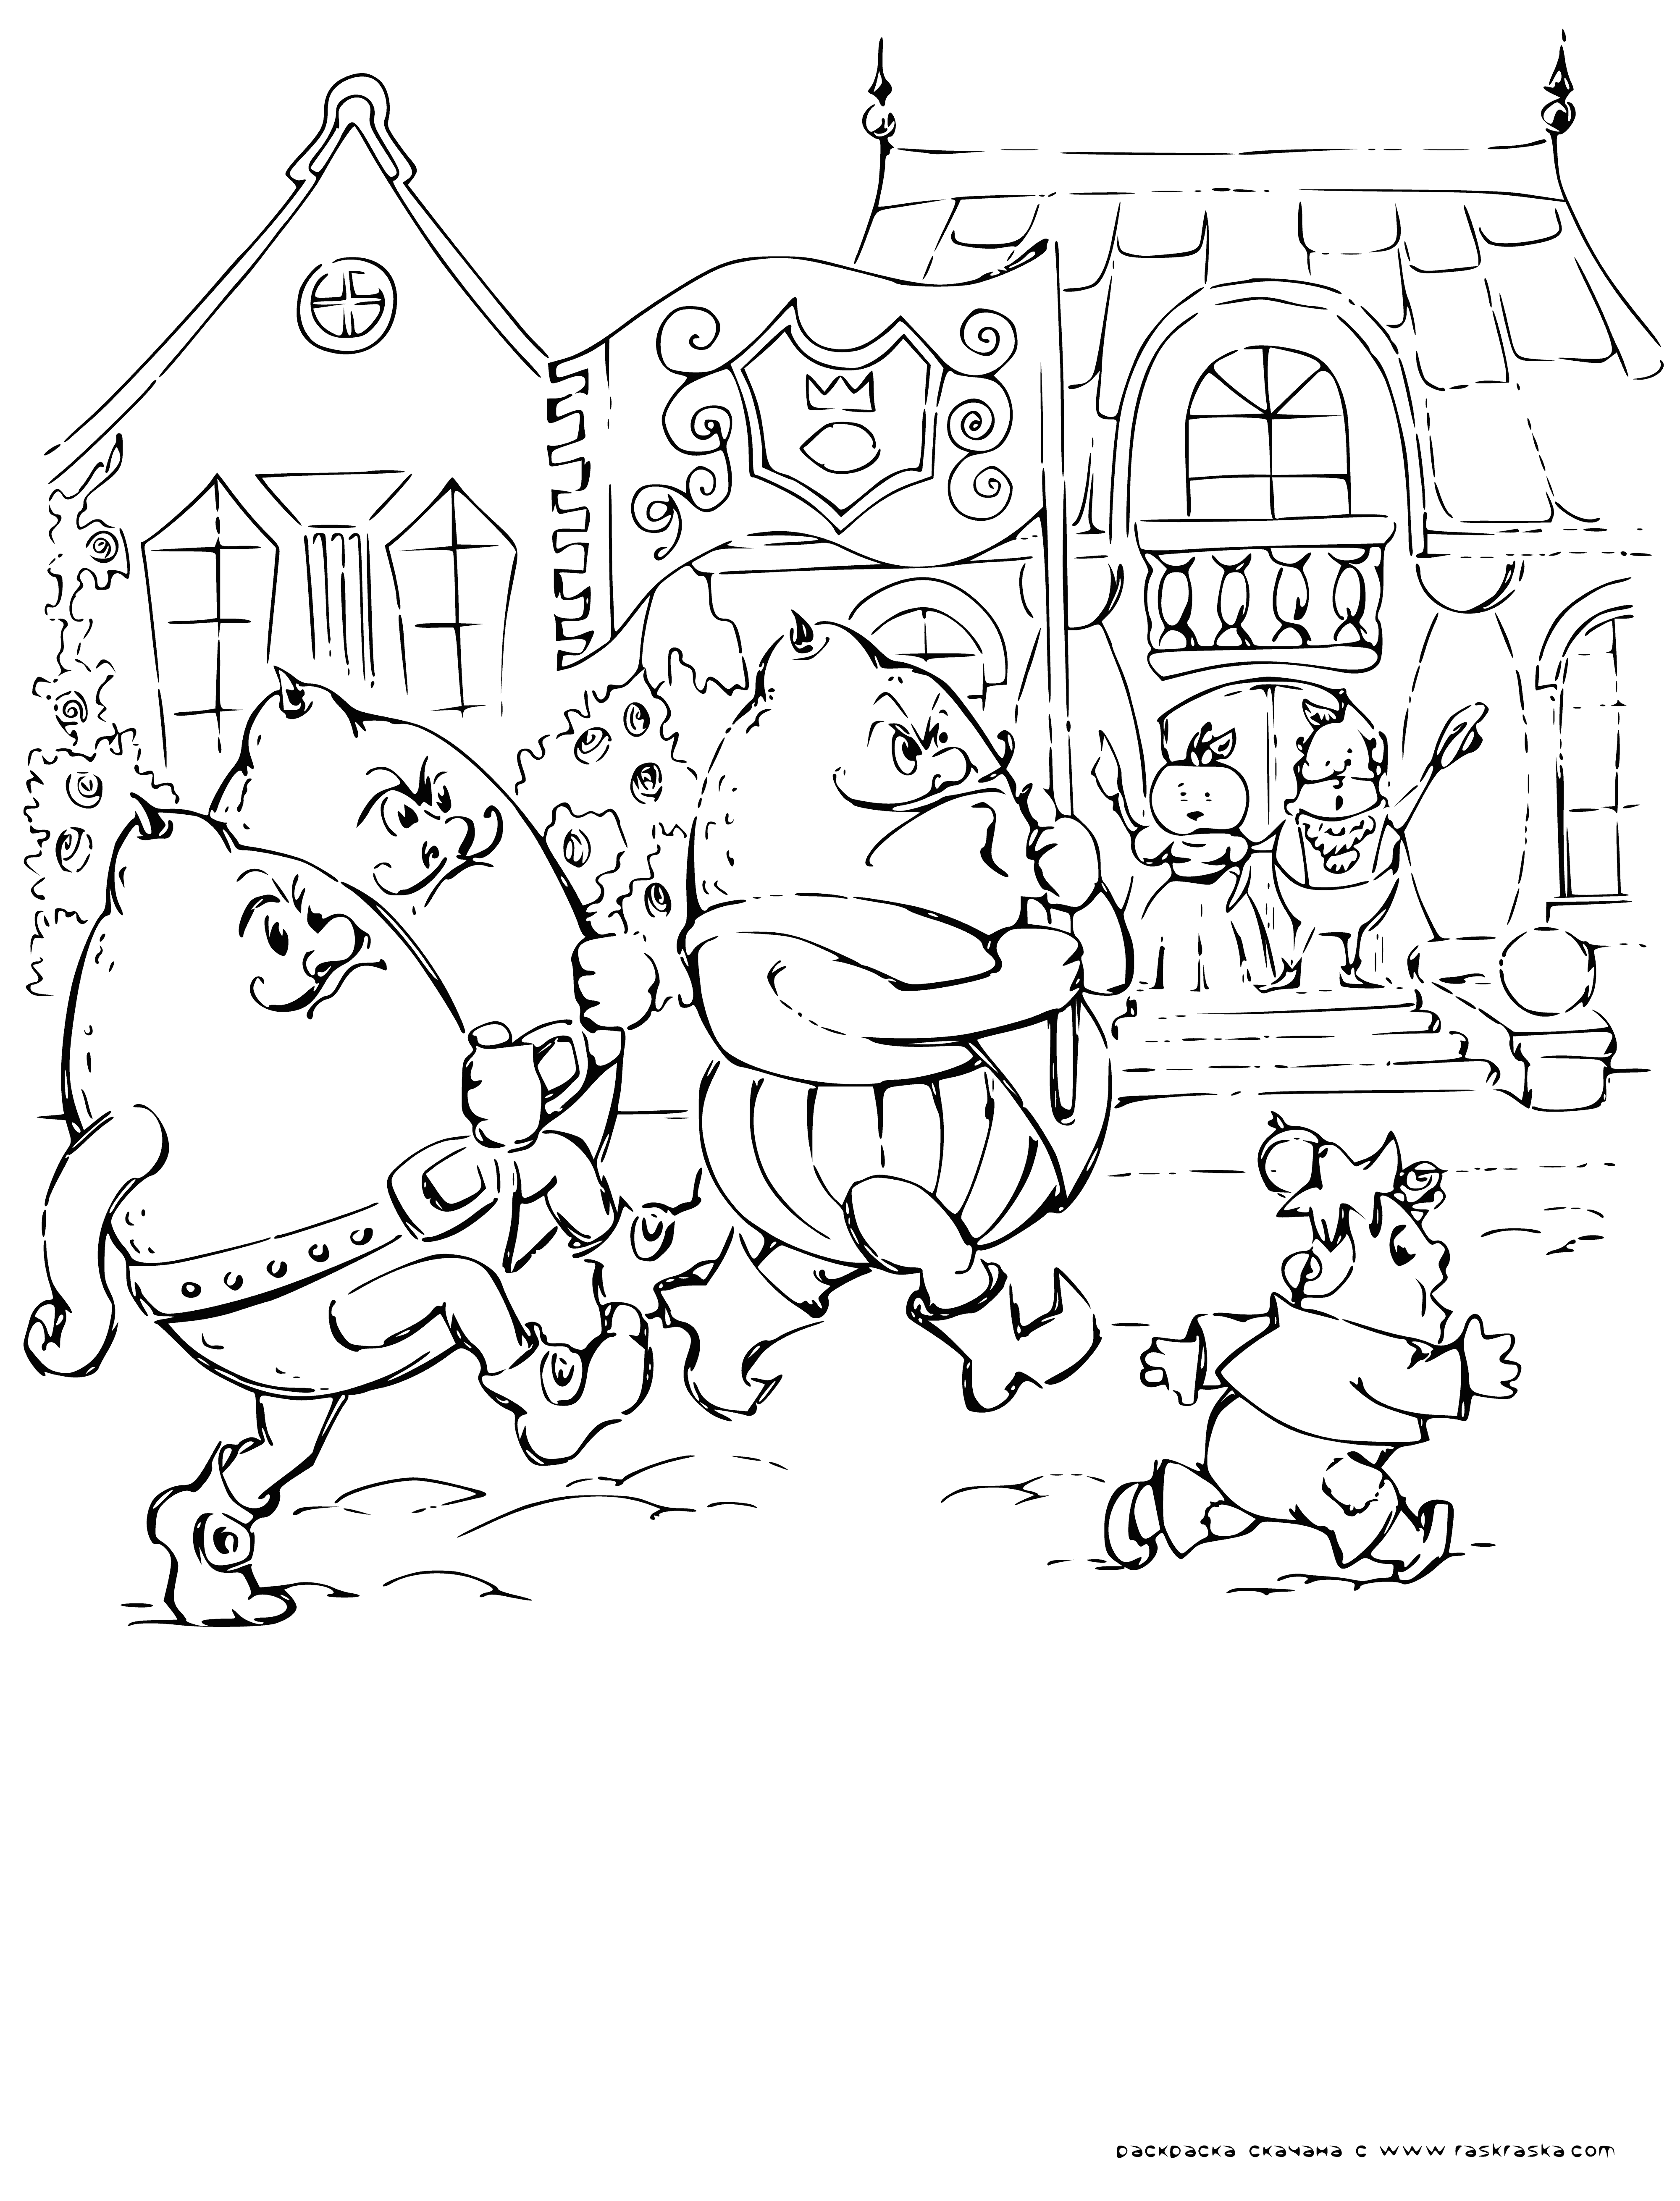 coloring page: Boy sits atop a large lemon, holding a stick and smiling. 4 smaller lemons around him have different facial expressions: scared, mad, sleepy, and surprised.